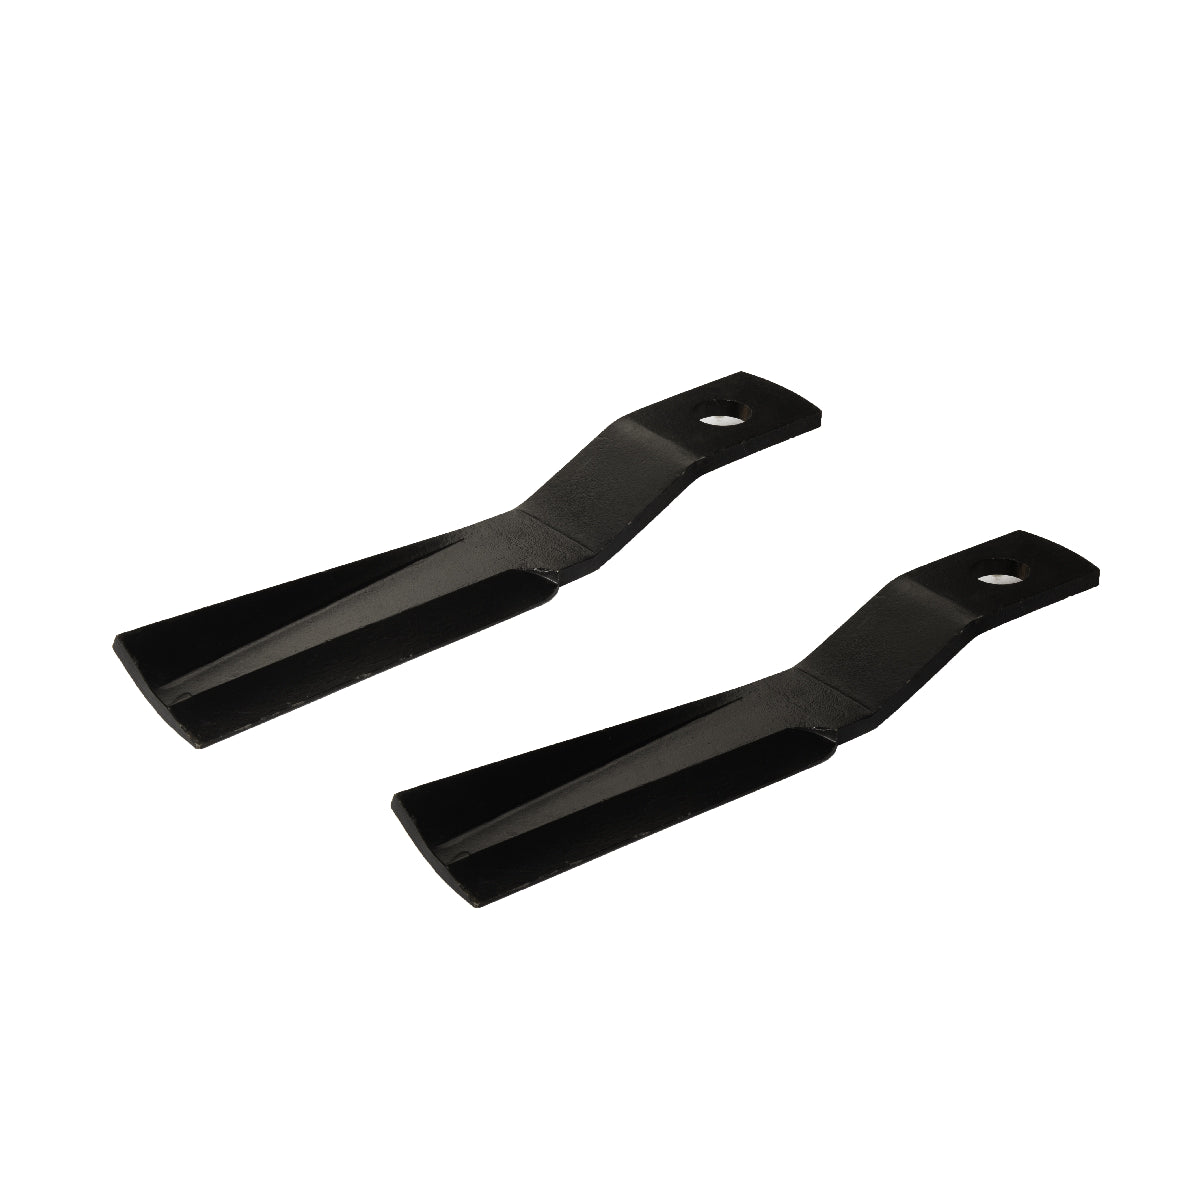 ( 1 Pack / 2 Pcs ) Blade for Extreme Duty Open Front Skid Steer Brush Cutter (SKU: 150177）